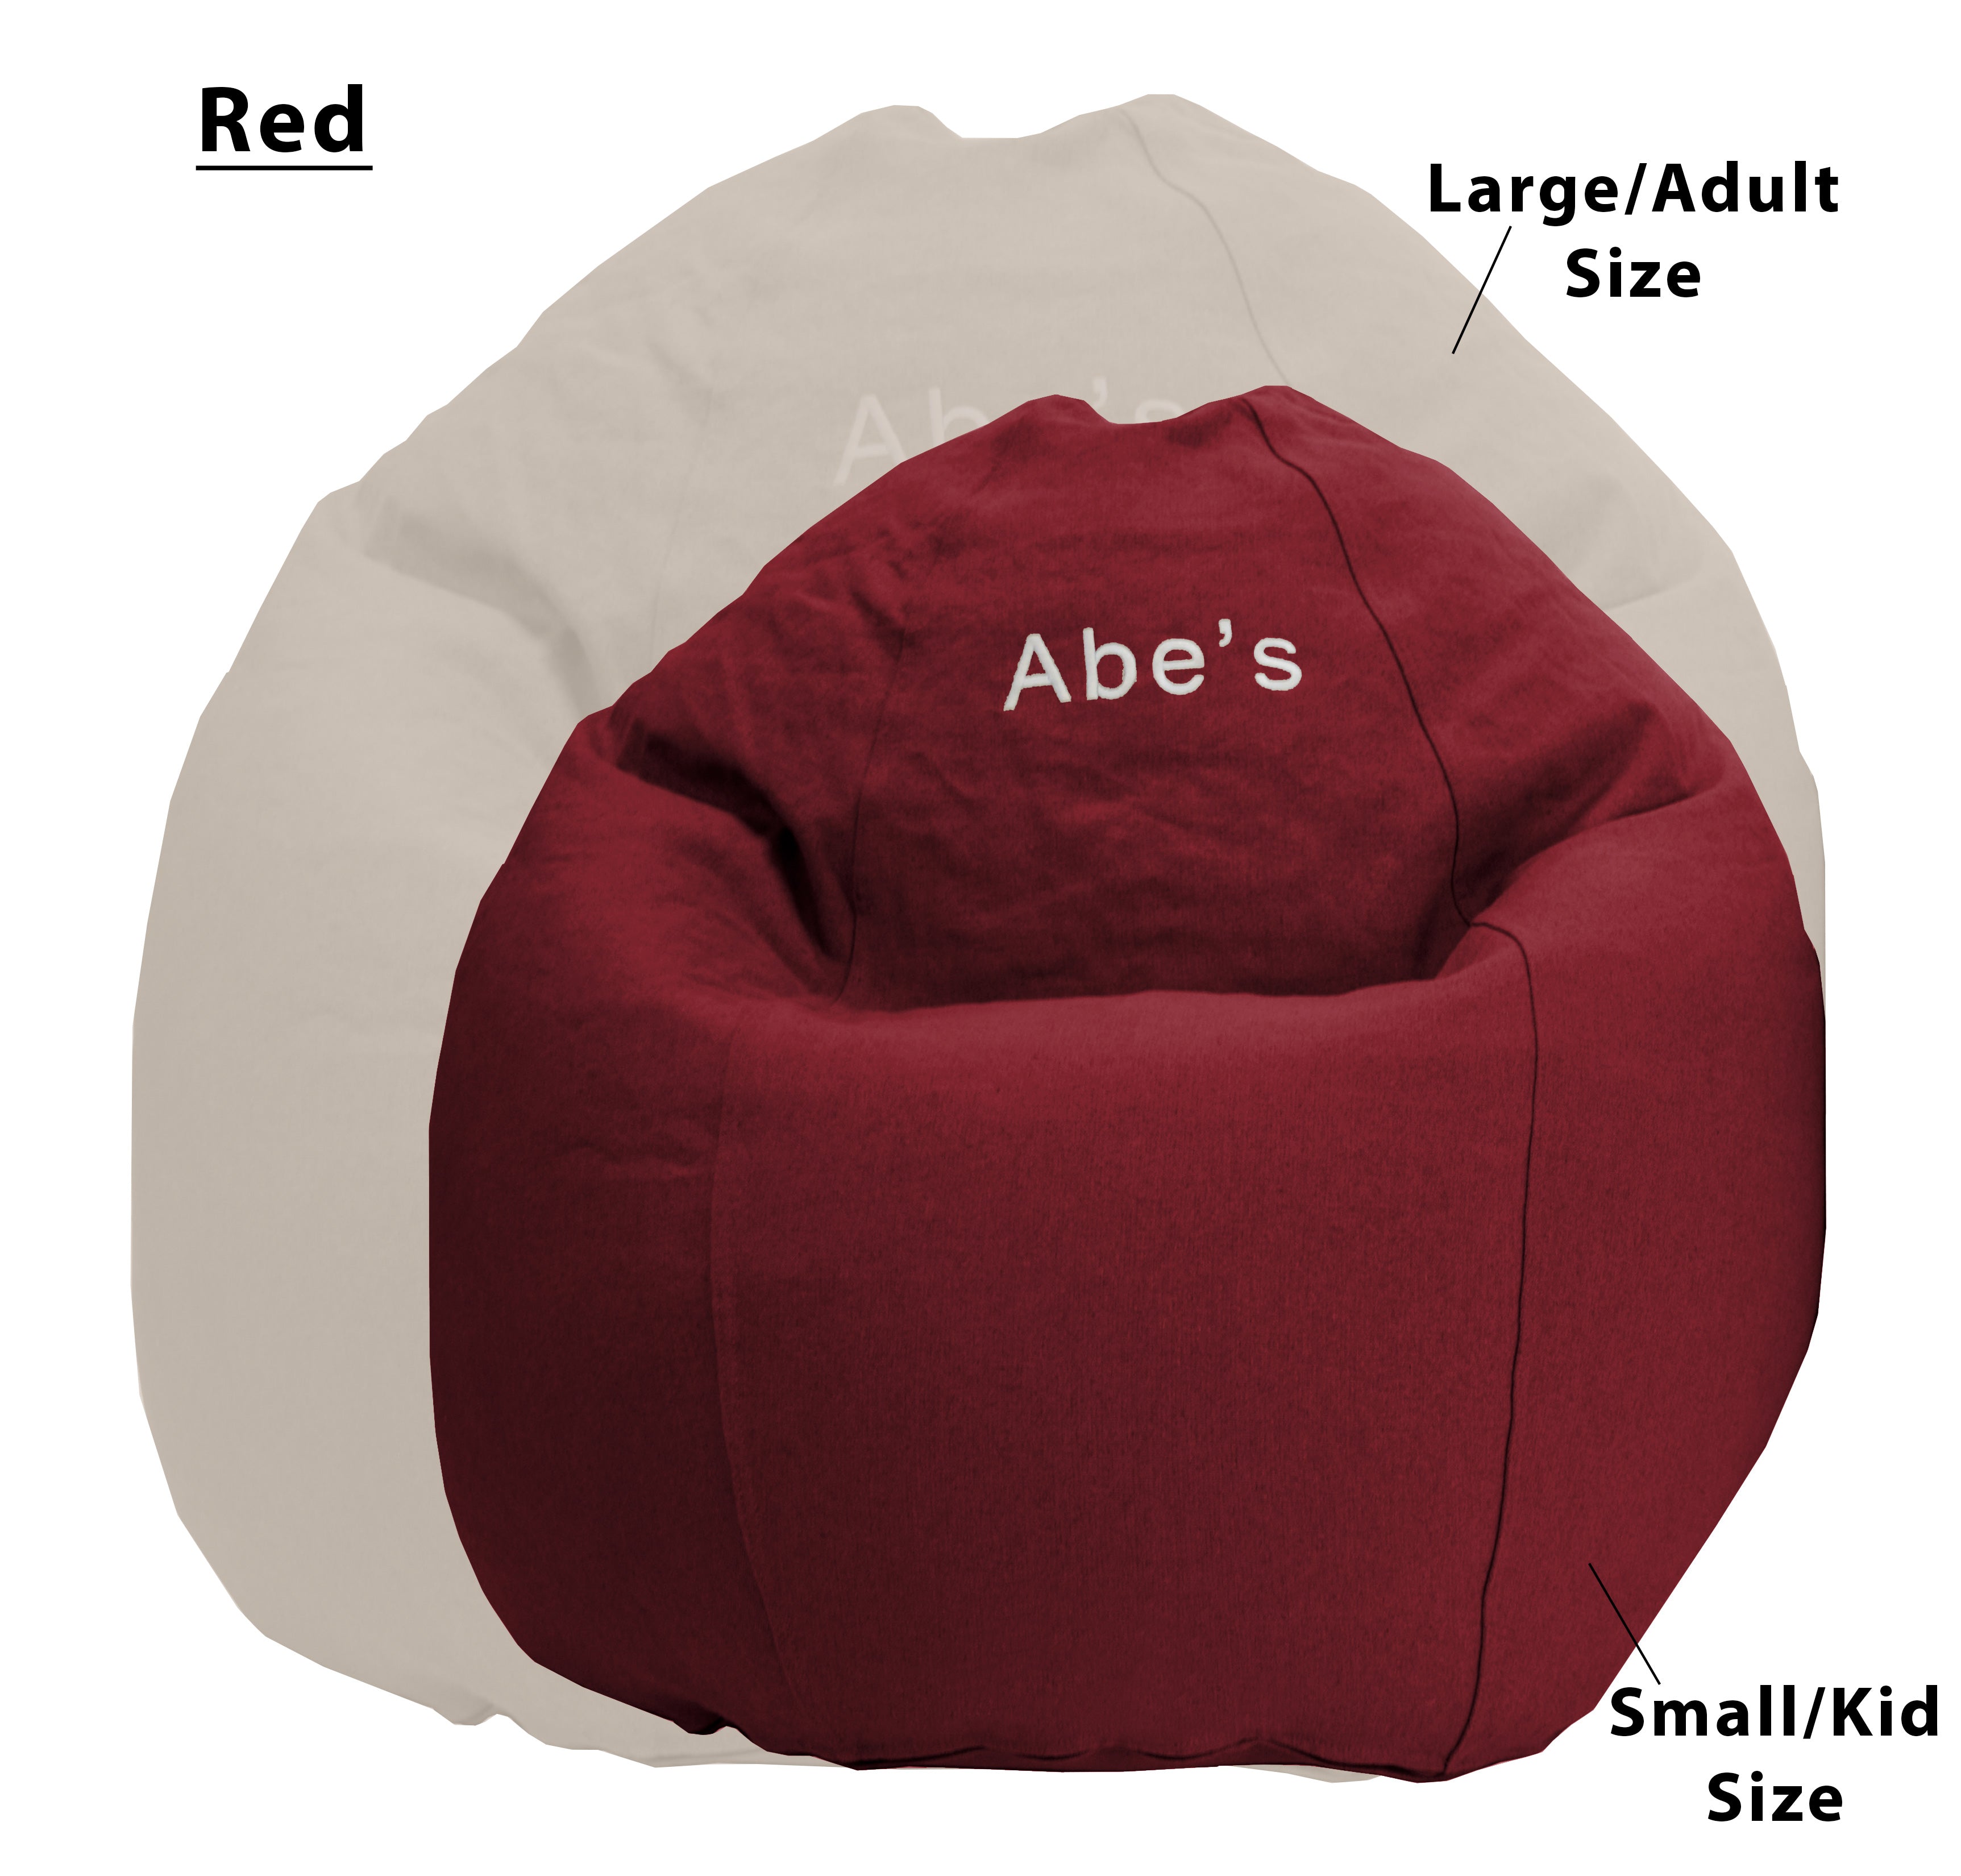 7 Eco-Friendly, Non-Toxic Bean Bag Chairs for 2024 - The Filtery